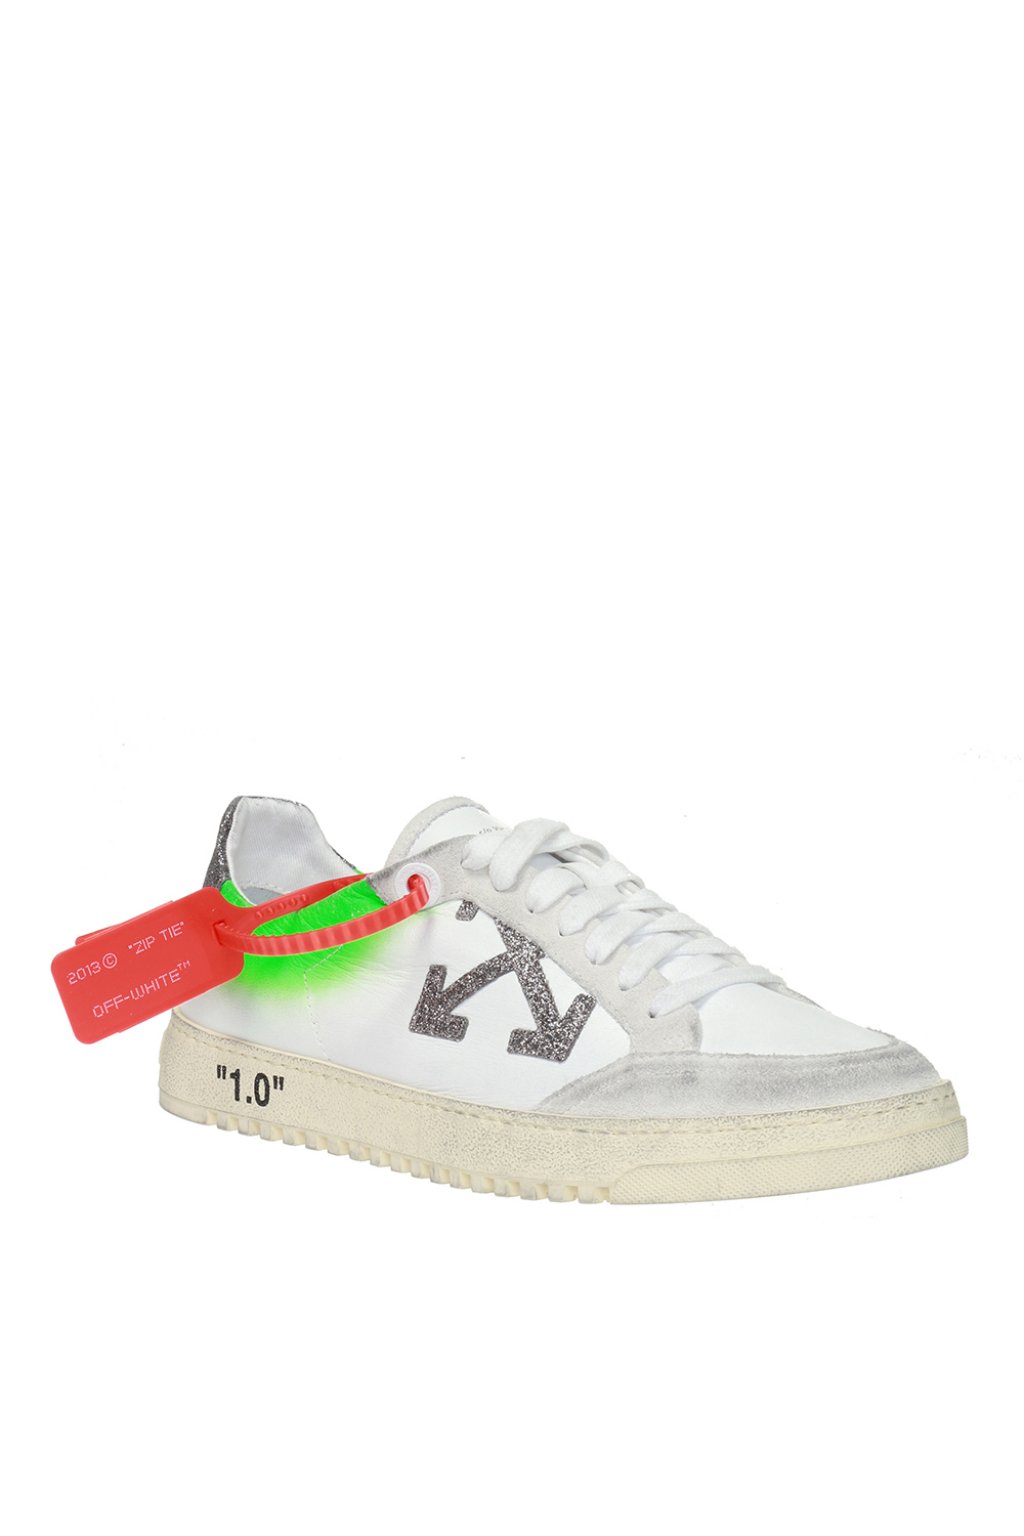 off white arrow sneakers